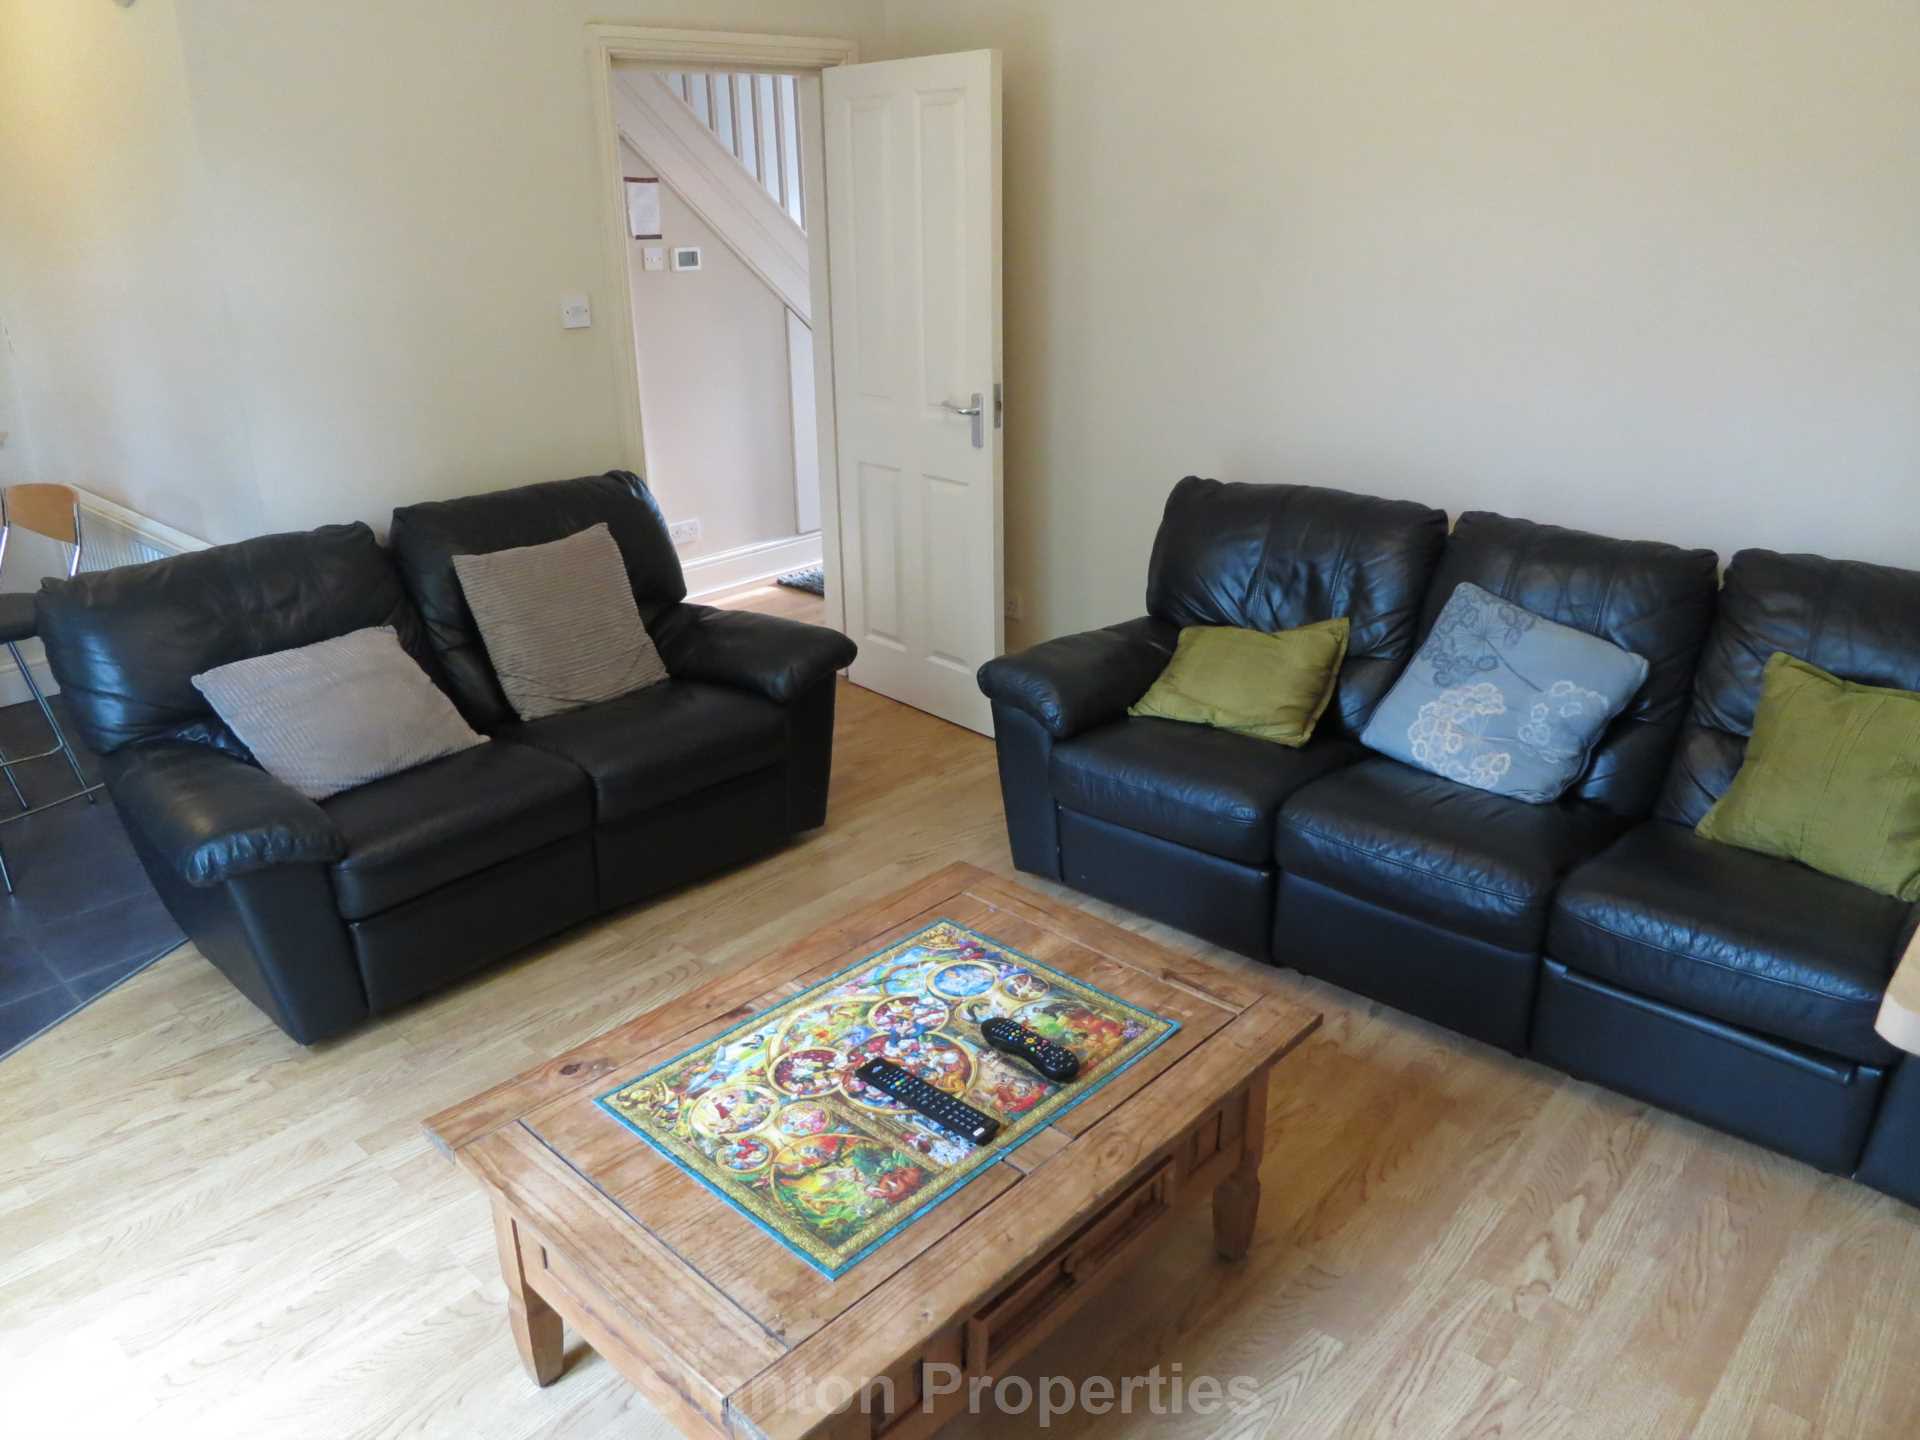 See Video Tour, £135 pppw, Brocklebank Road, Fallowfield, Image 2